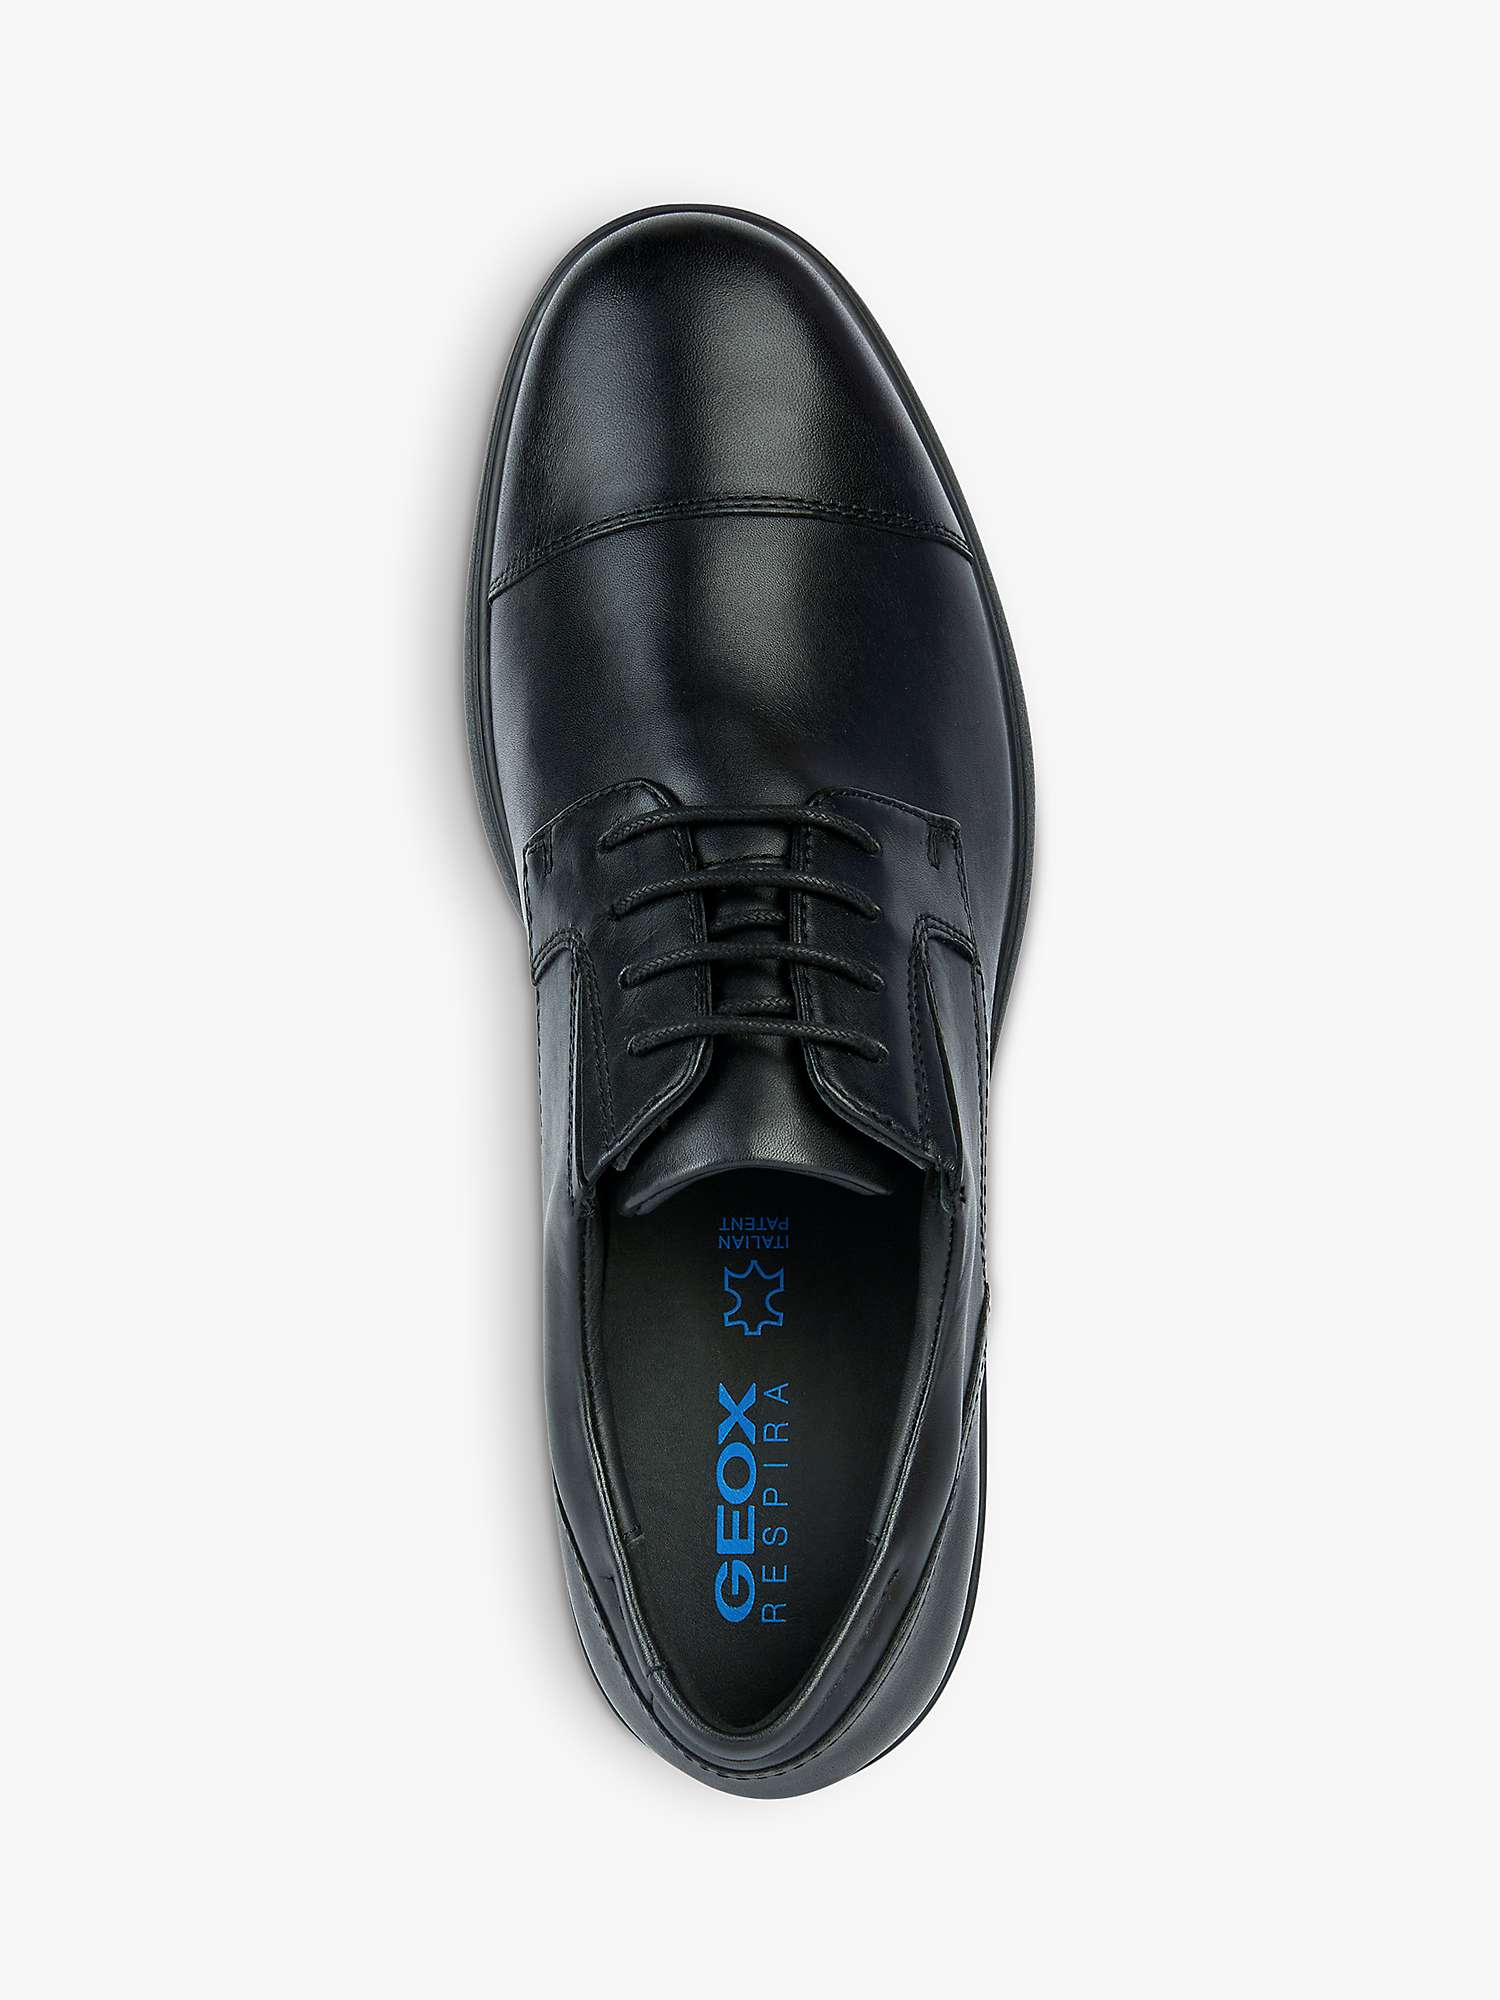 Buy Geox Spherica EC11 Leather Oxford Shoes Online at johnlewis.com